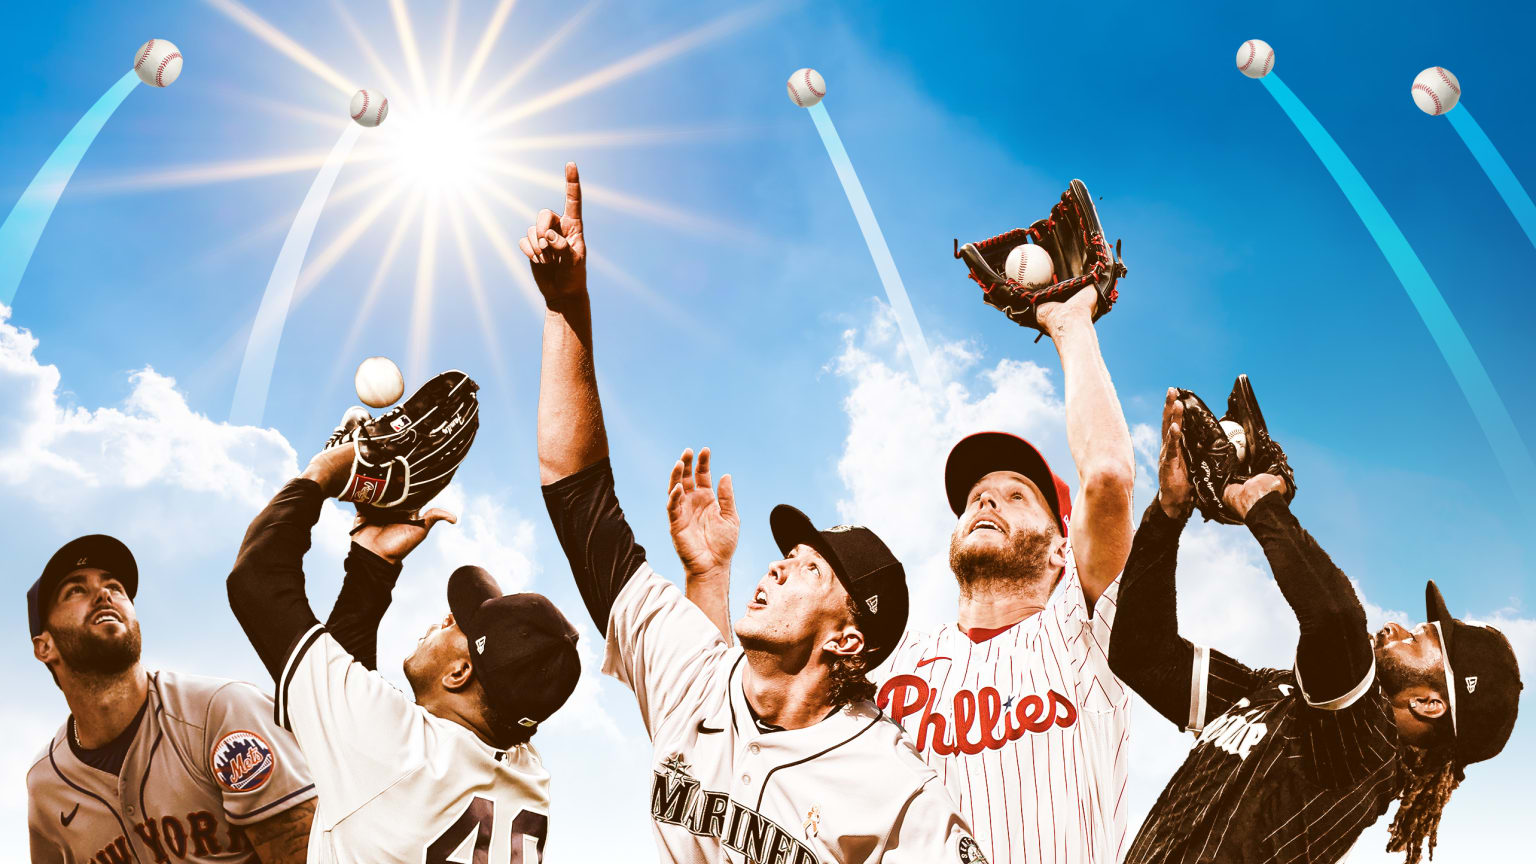 A photo illustration shows five pitchers reaching up to catch pop flies